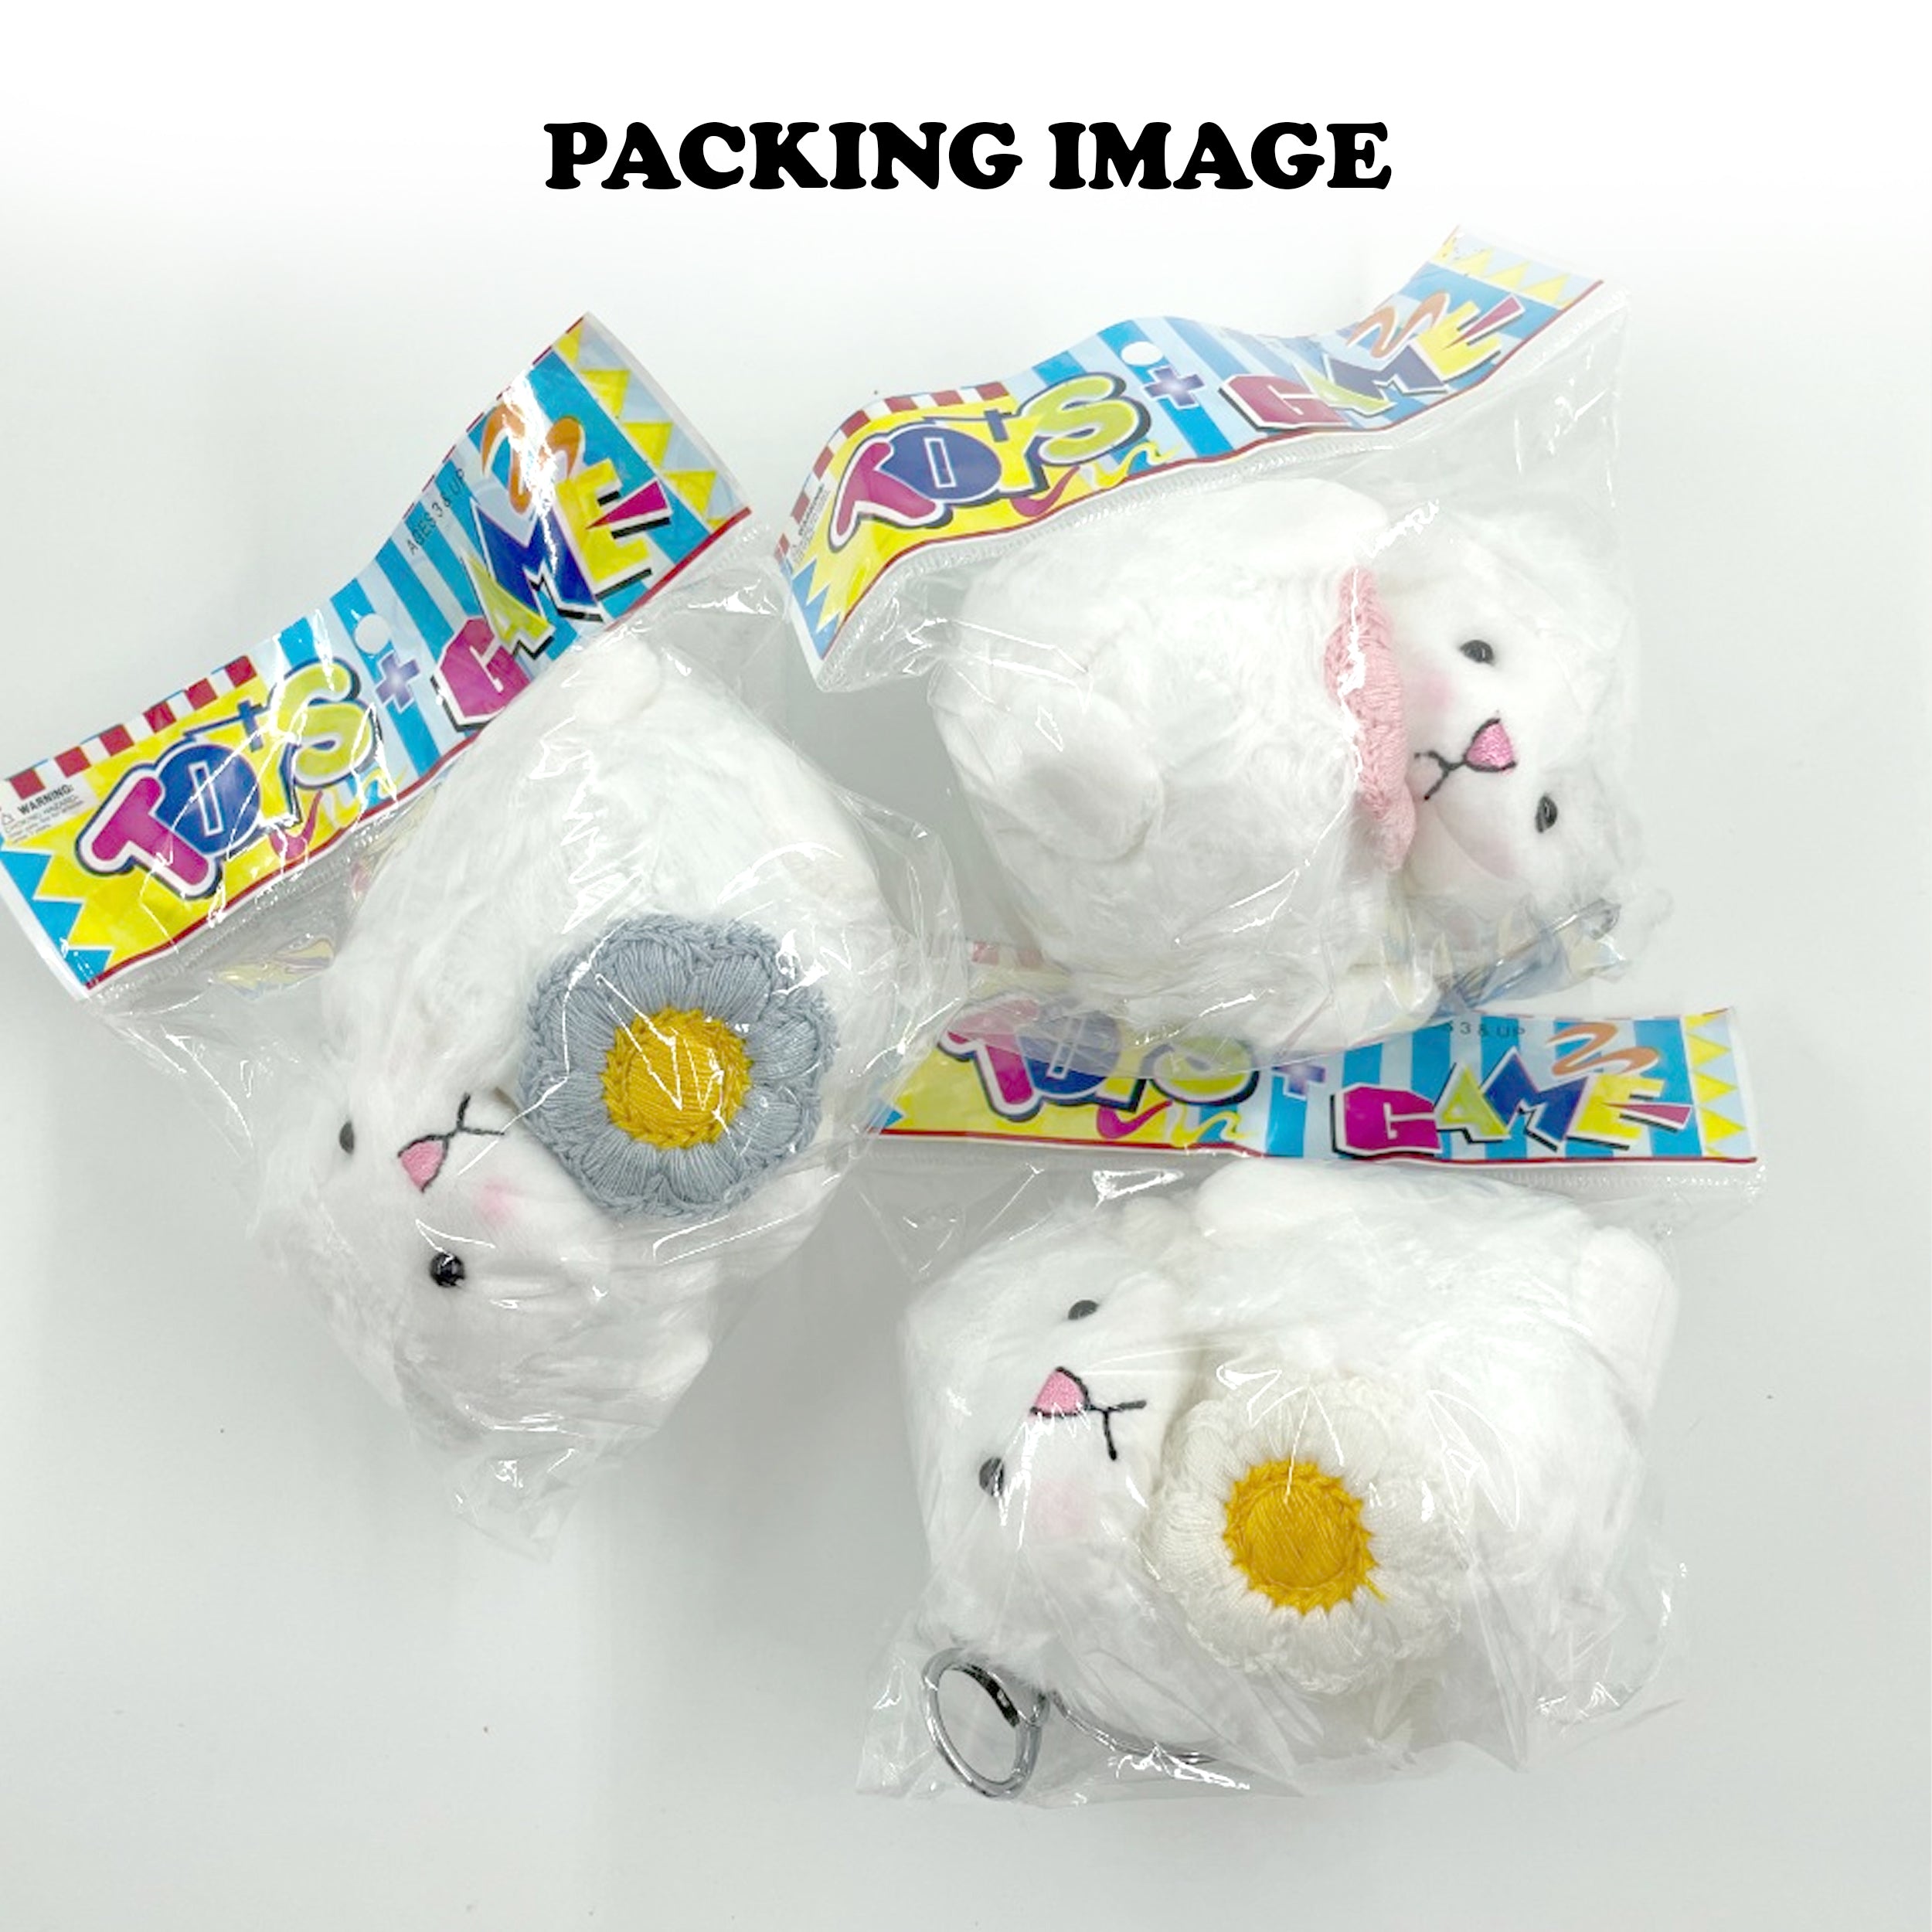 Shop Wholesale White Sheep Alpaca Keychains - Add Some Fluffy Fun to Your Keys